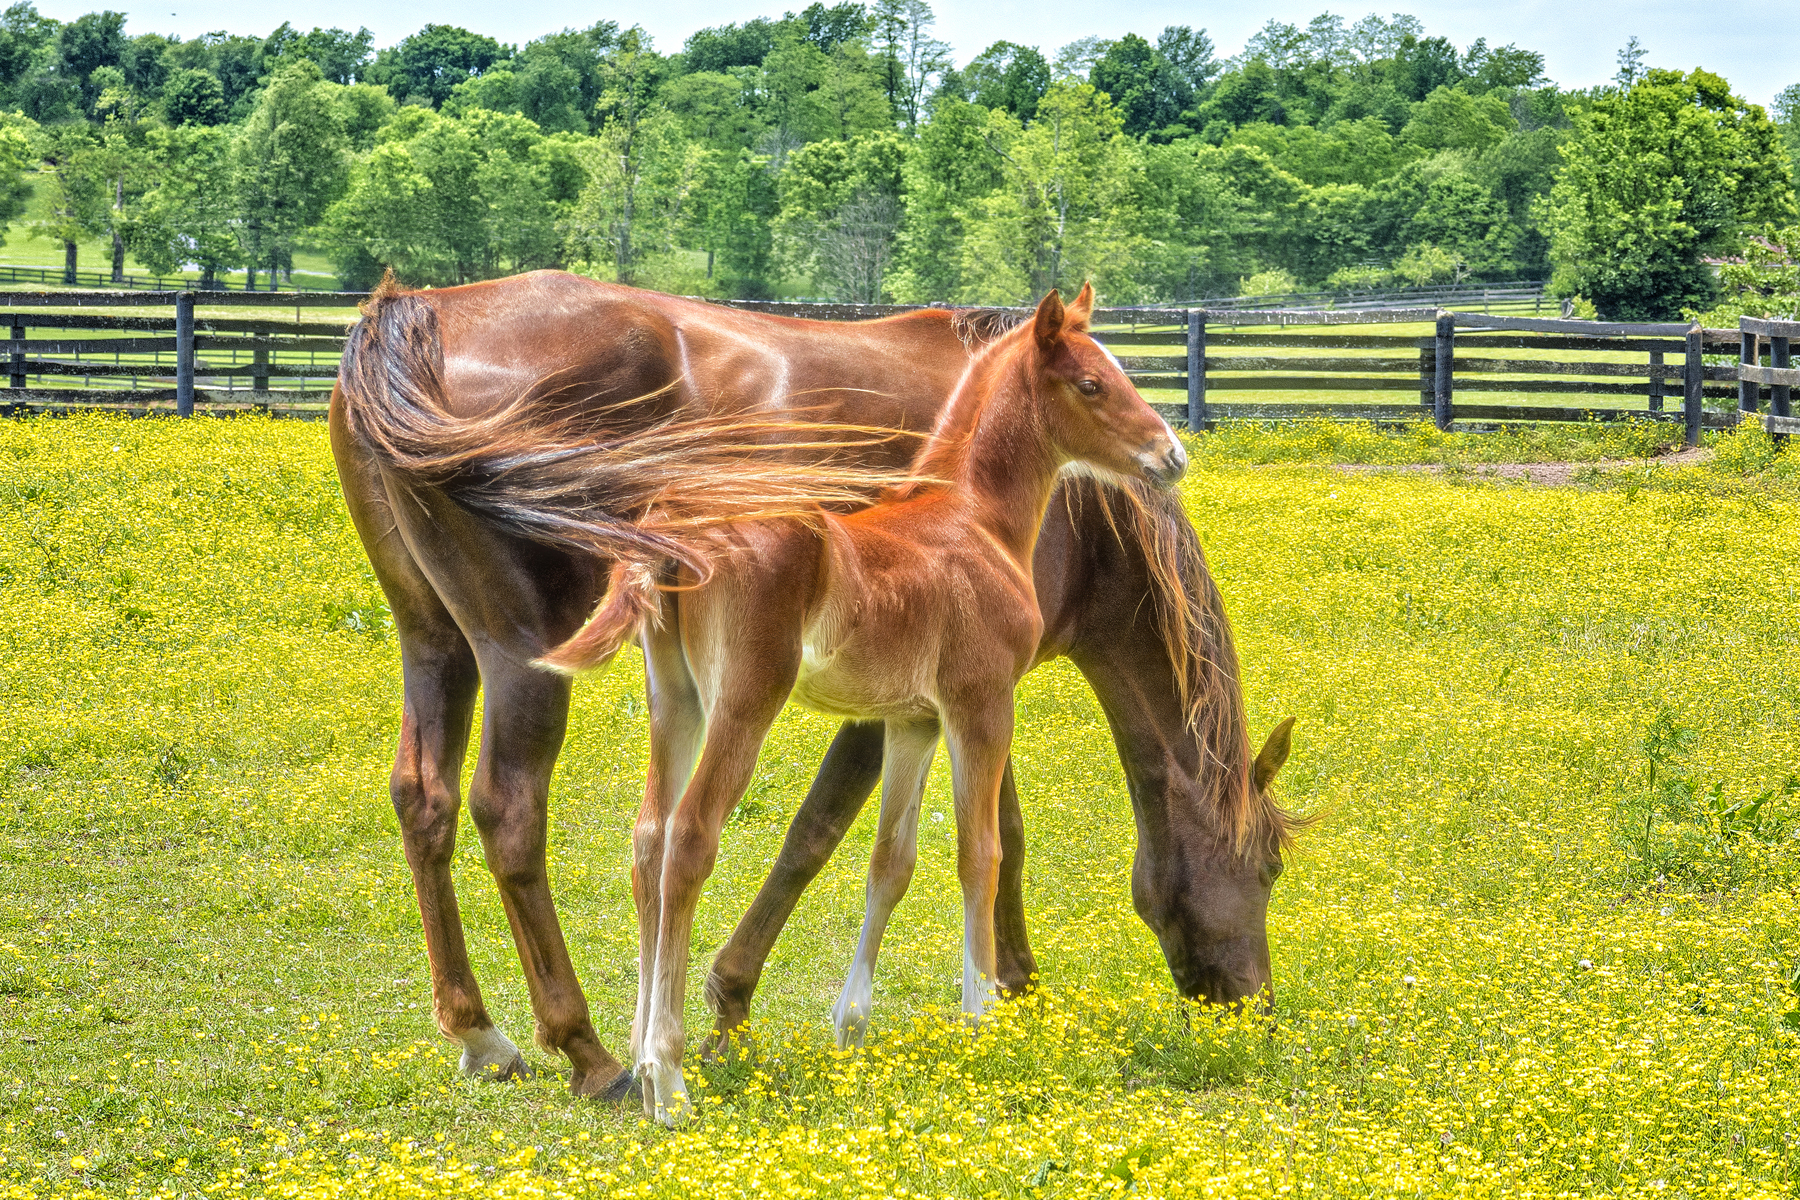 MOM AND BABE - Taken on a drive through central Kentucky in the spring. At that time of the year you are given many oppoirtunities for shots like this.